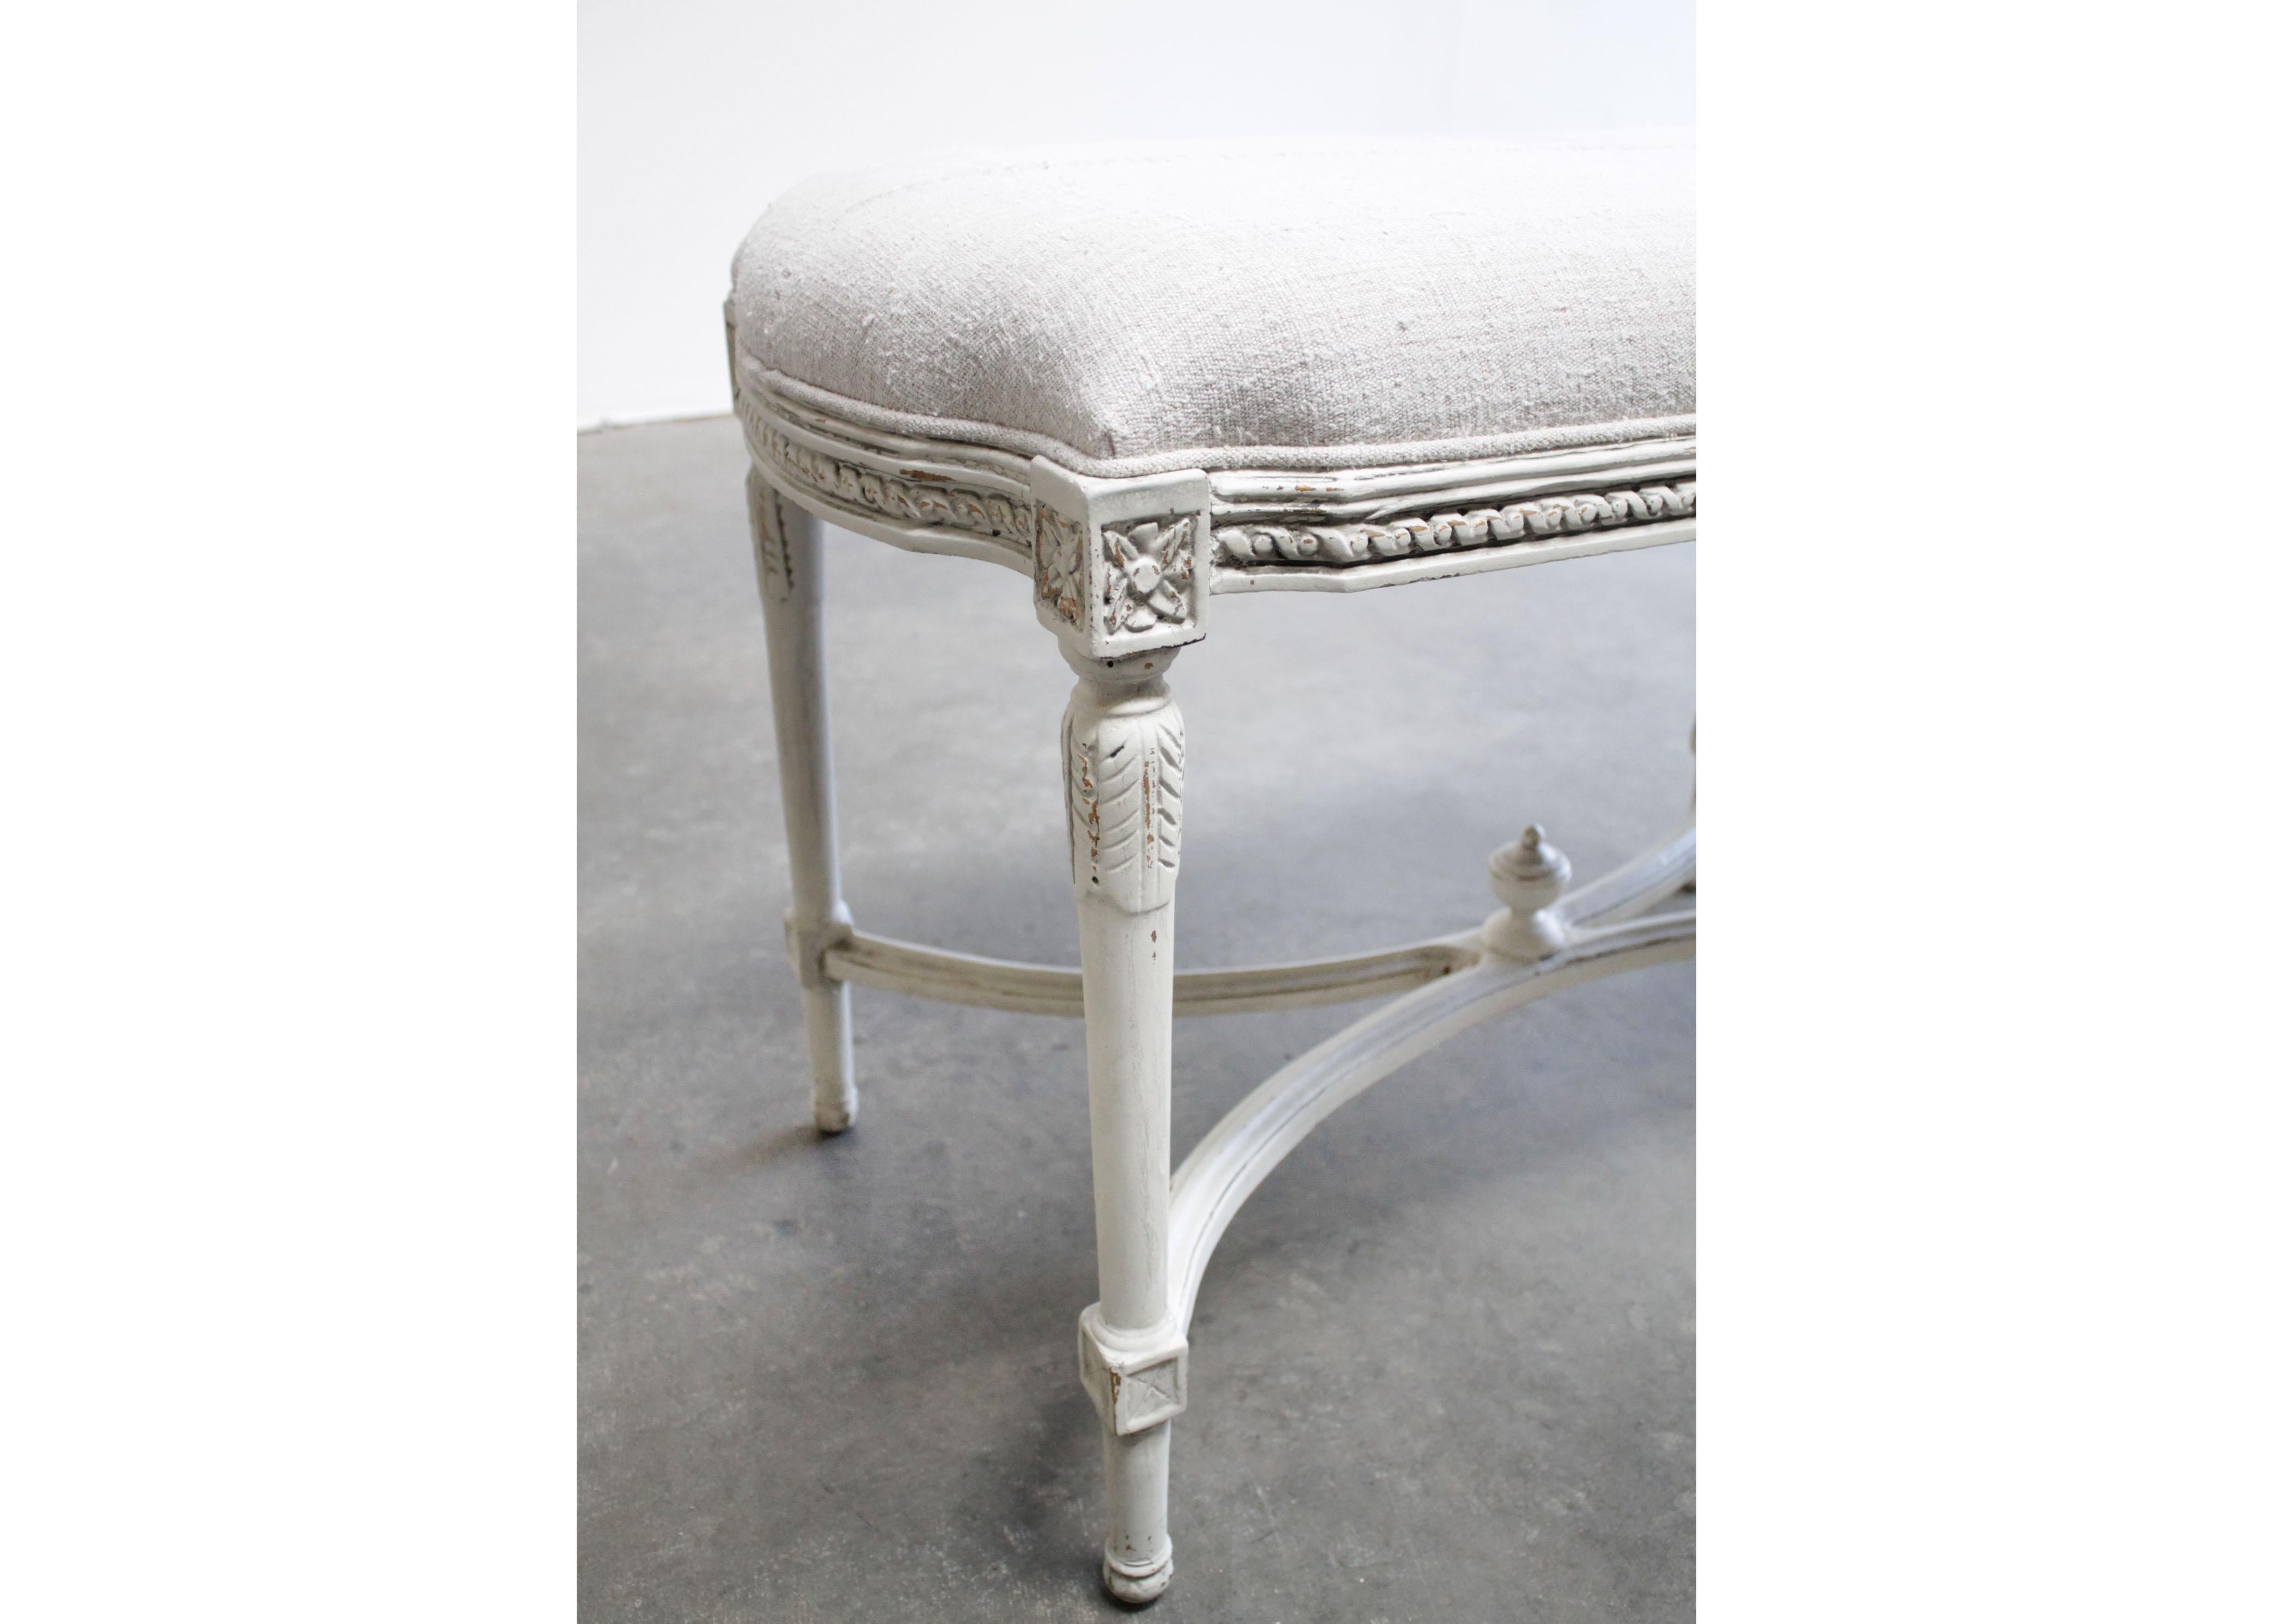 20th Century Antique Louis XVI Style Upholstered High Bench Ottoman with Antique Linen